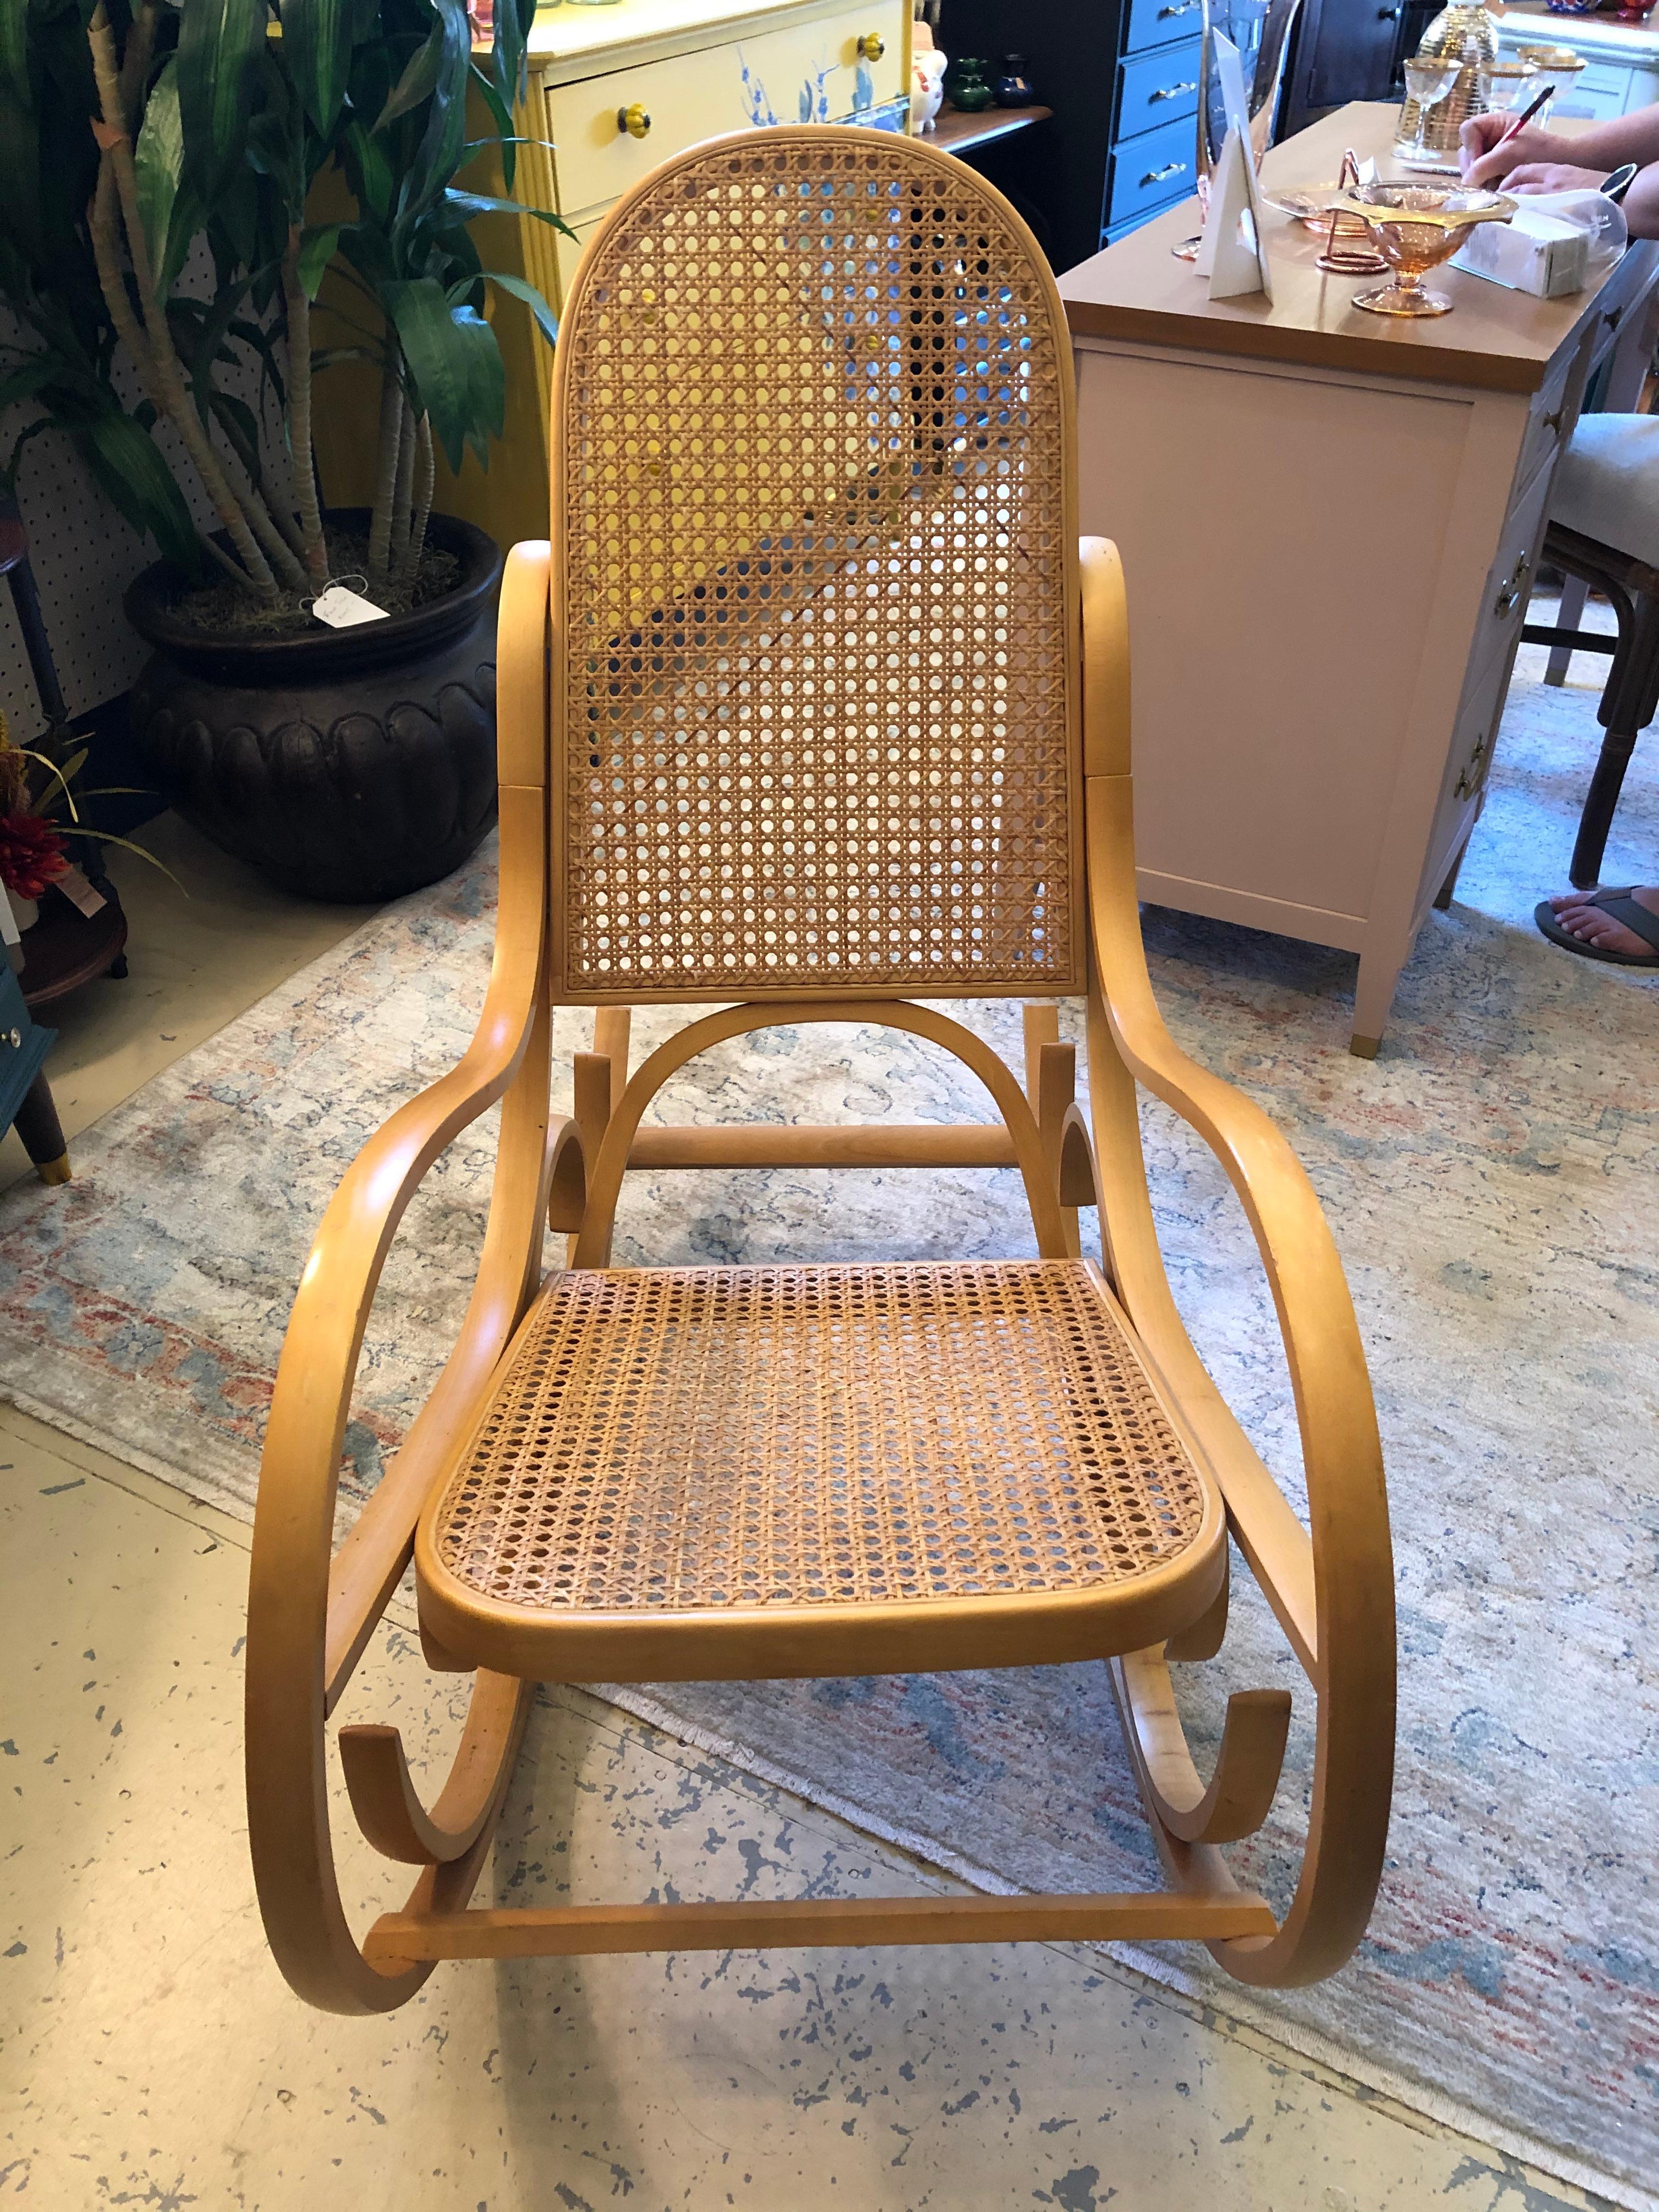 Classic Thonet style light colored bentwood rocking chair having the recognizable curlicues and caned wicker seat and back. Functions comfortably.

Diana B.